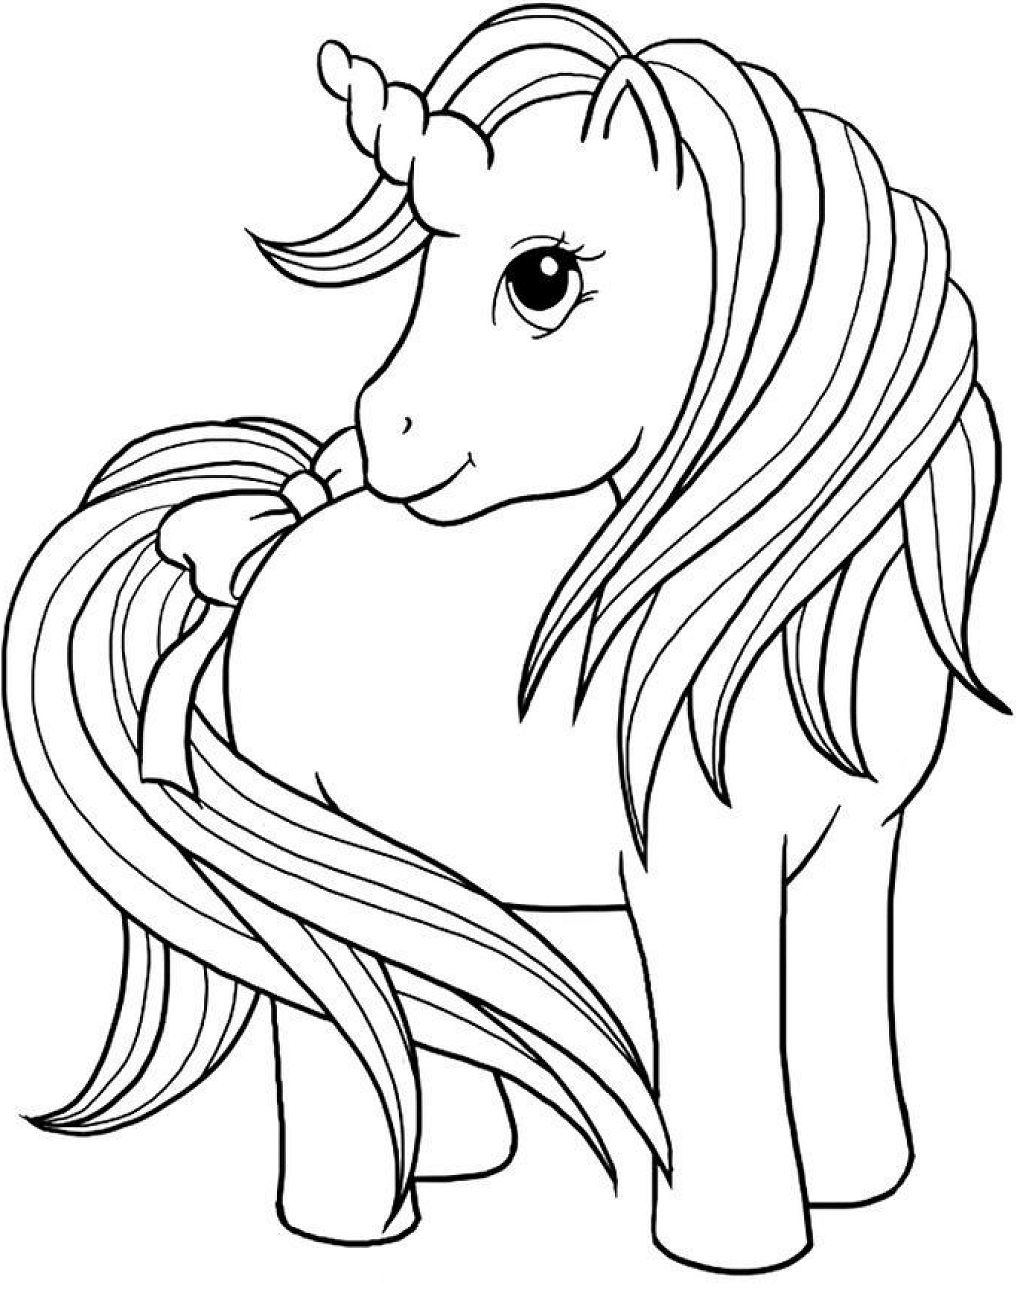 Twins Unicorn Coloring Page - Free Printable Coloring Pages for Kids